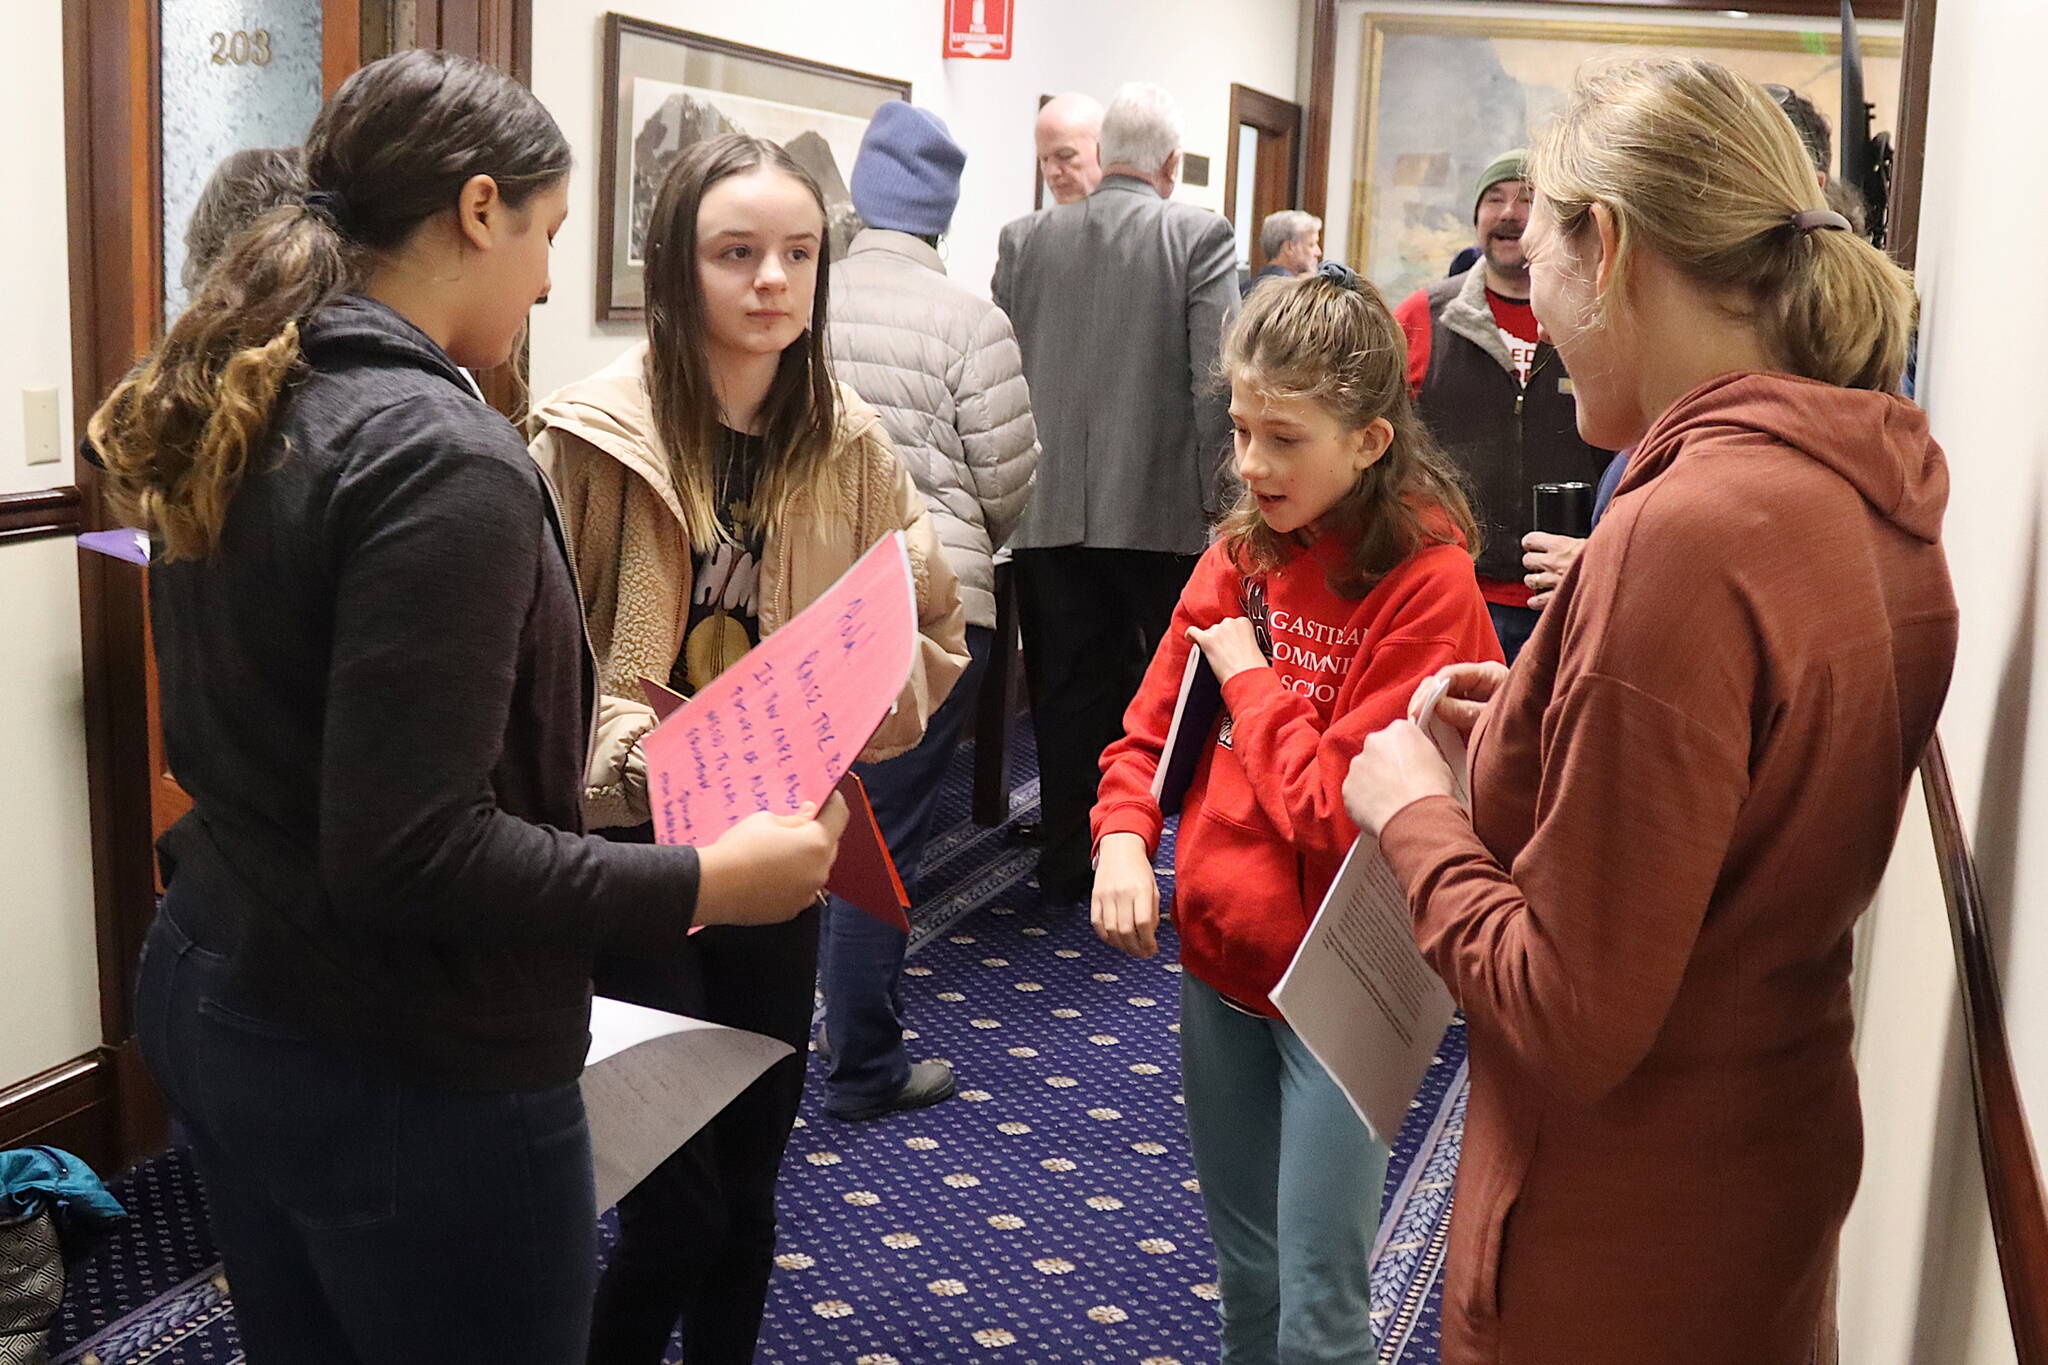 From left, Bela Pyare, 13, Josie Elfers, 11, Nayeli Hood, 11, and Emily Ferry, a member of the Alaska Association of School Boards, discuss their testimony about a board-based education bill in a hallway at the Alaska State Capitol during a House Rule Committee meeting on Saturday. (Mark Sabbatini / Juneau Empire)